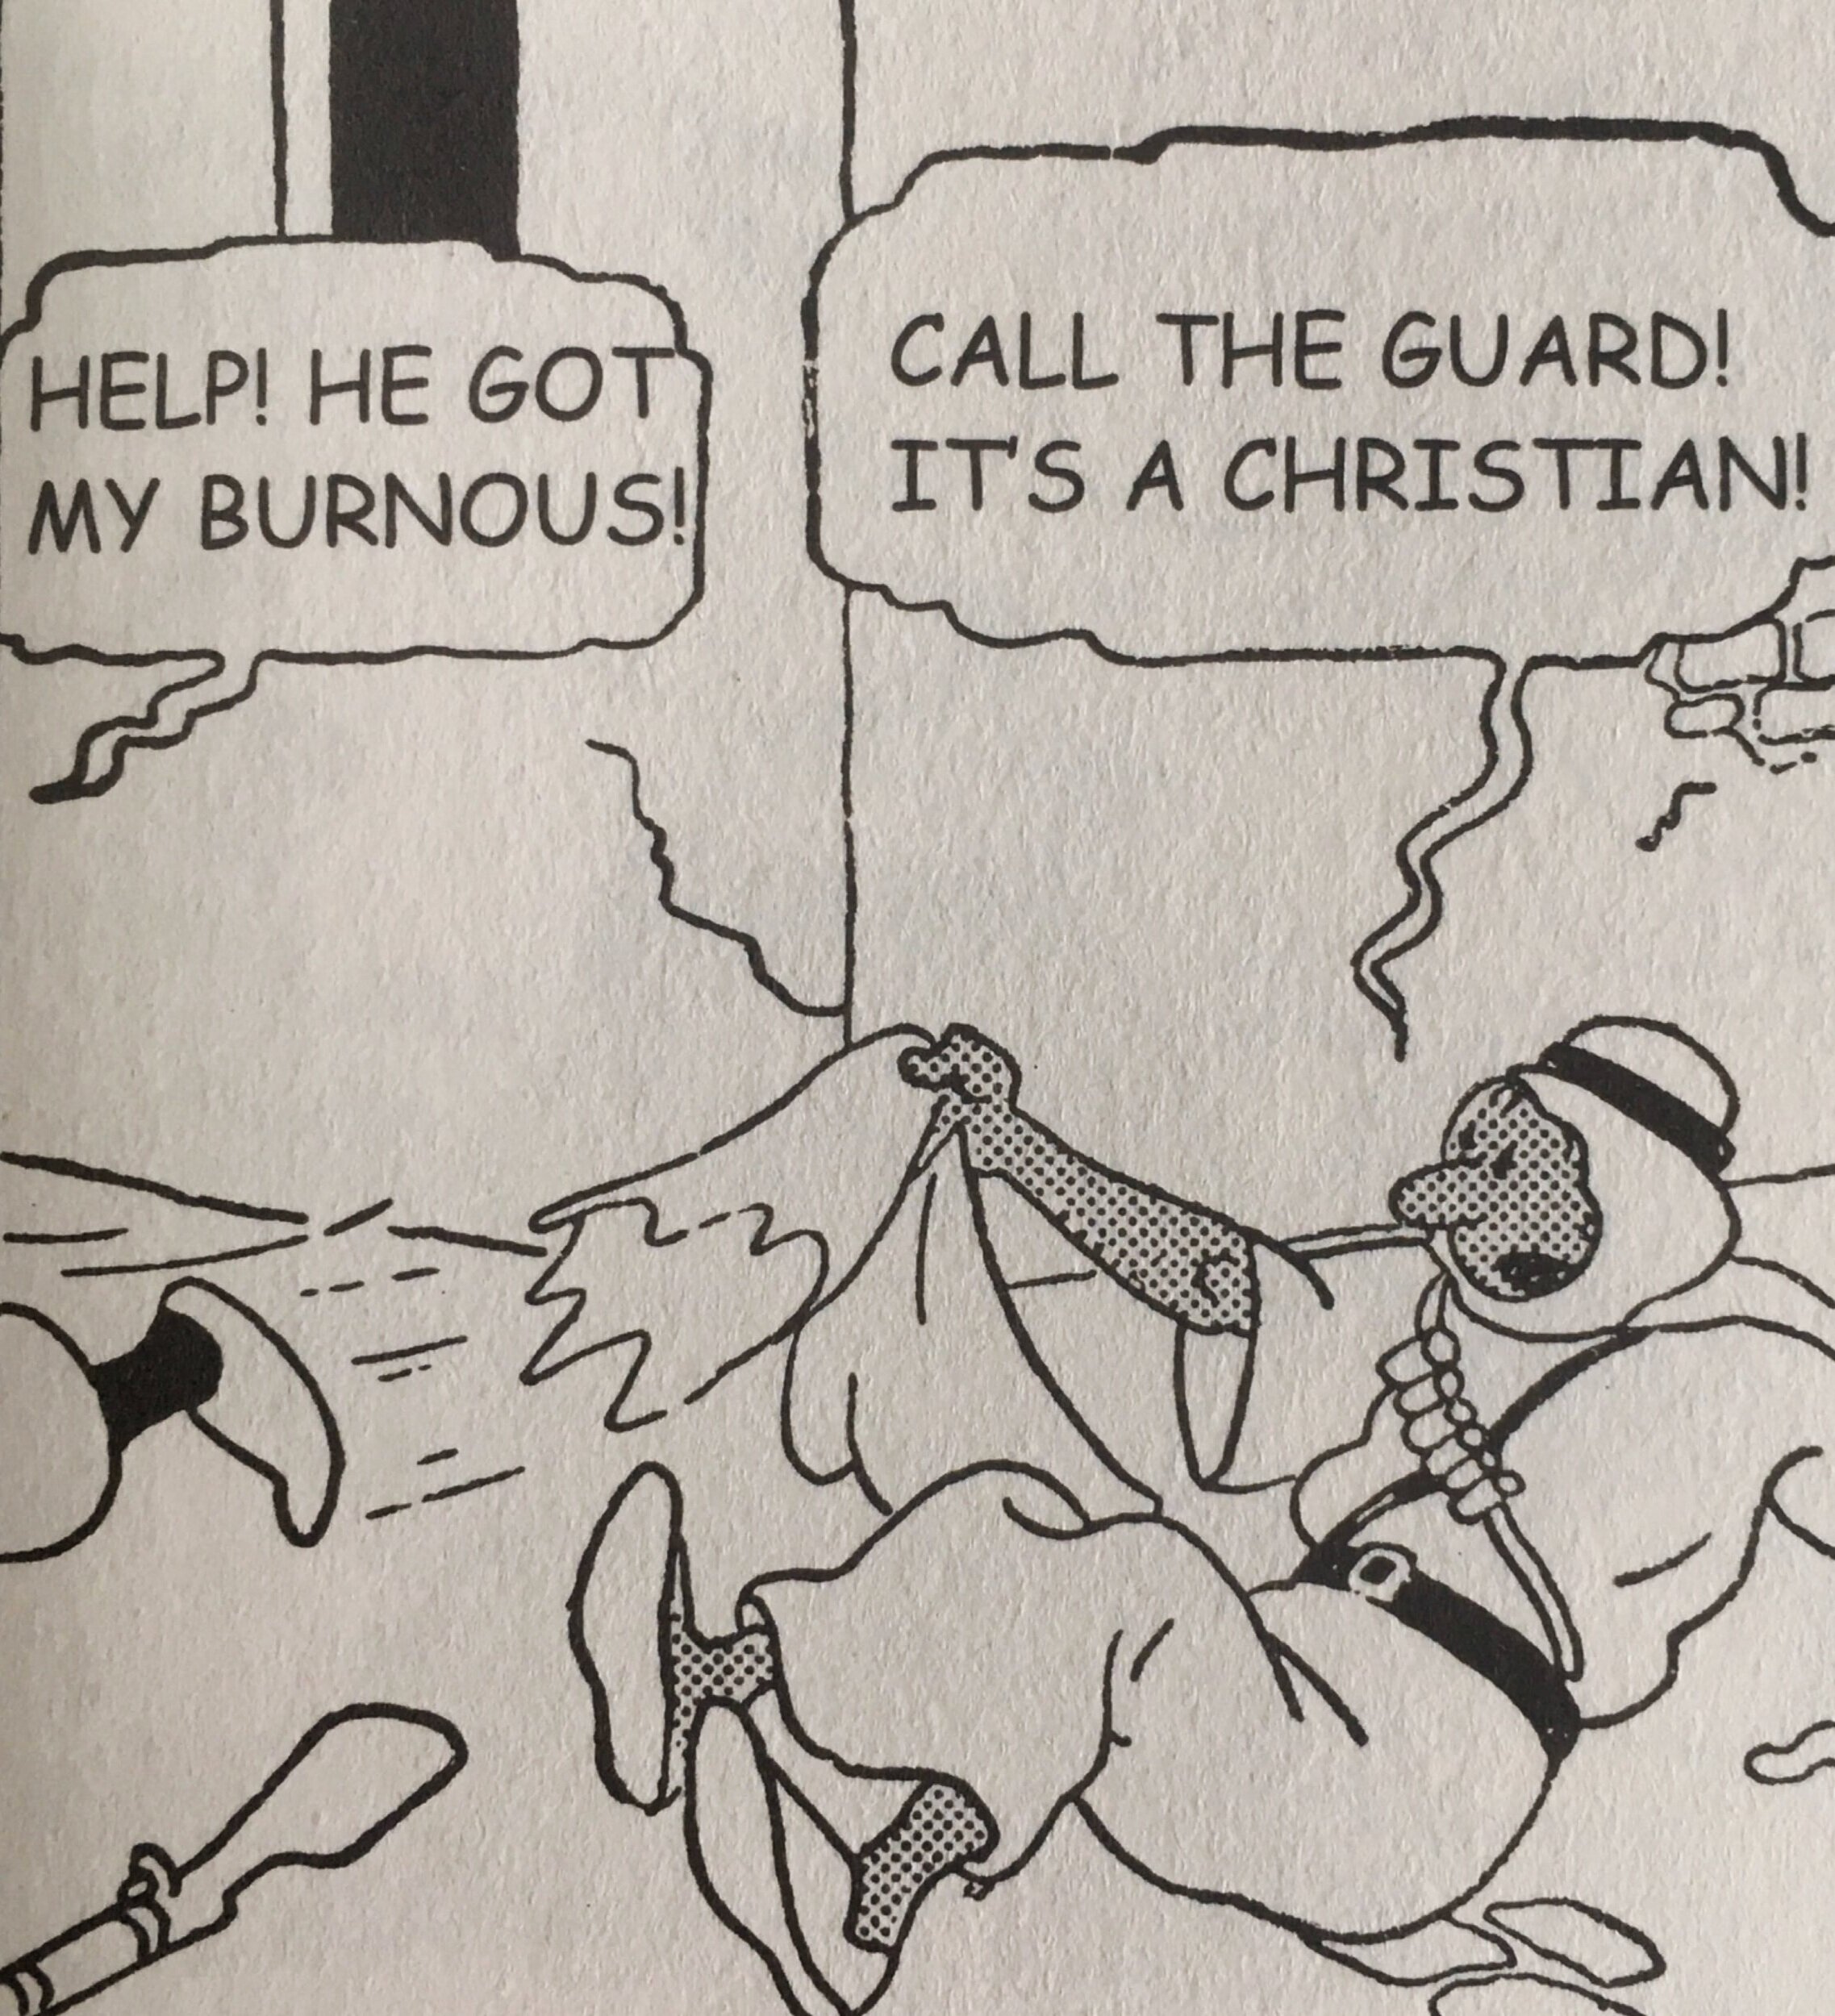    The 1934 edition has Tintin landing in Mecca (changed to an unnamed generic city in the 1955 edition) and is chased out after being exposed as a Christian, not as a spy. 